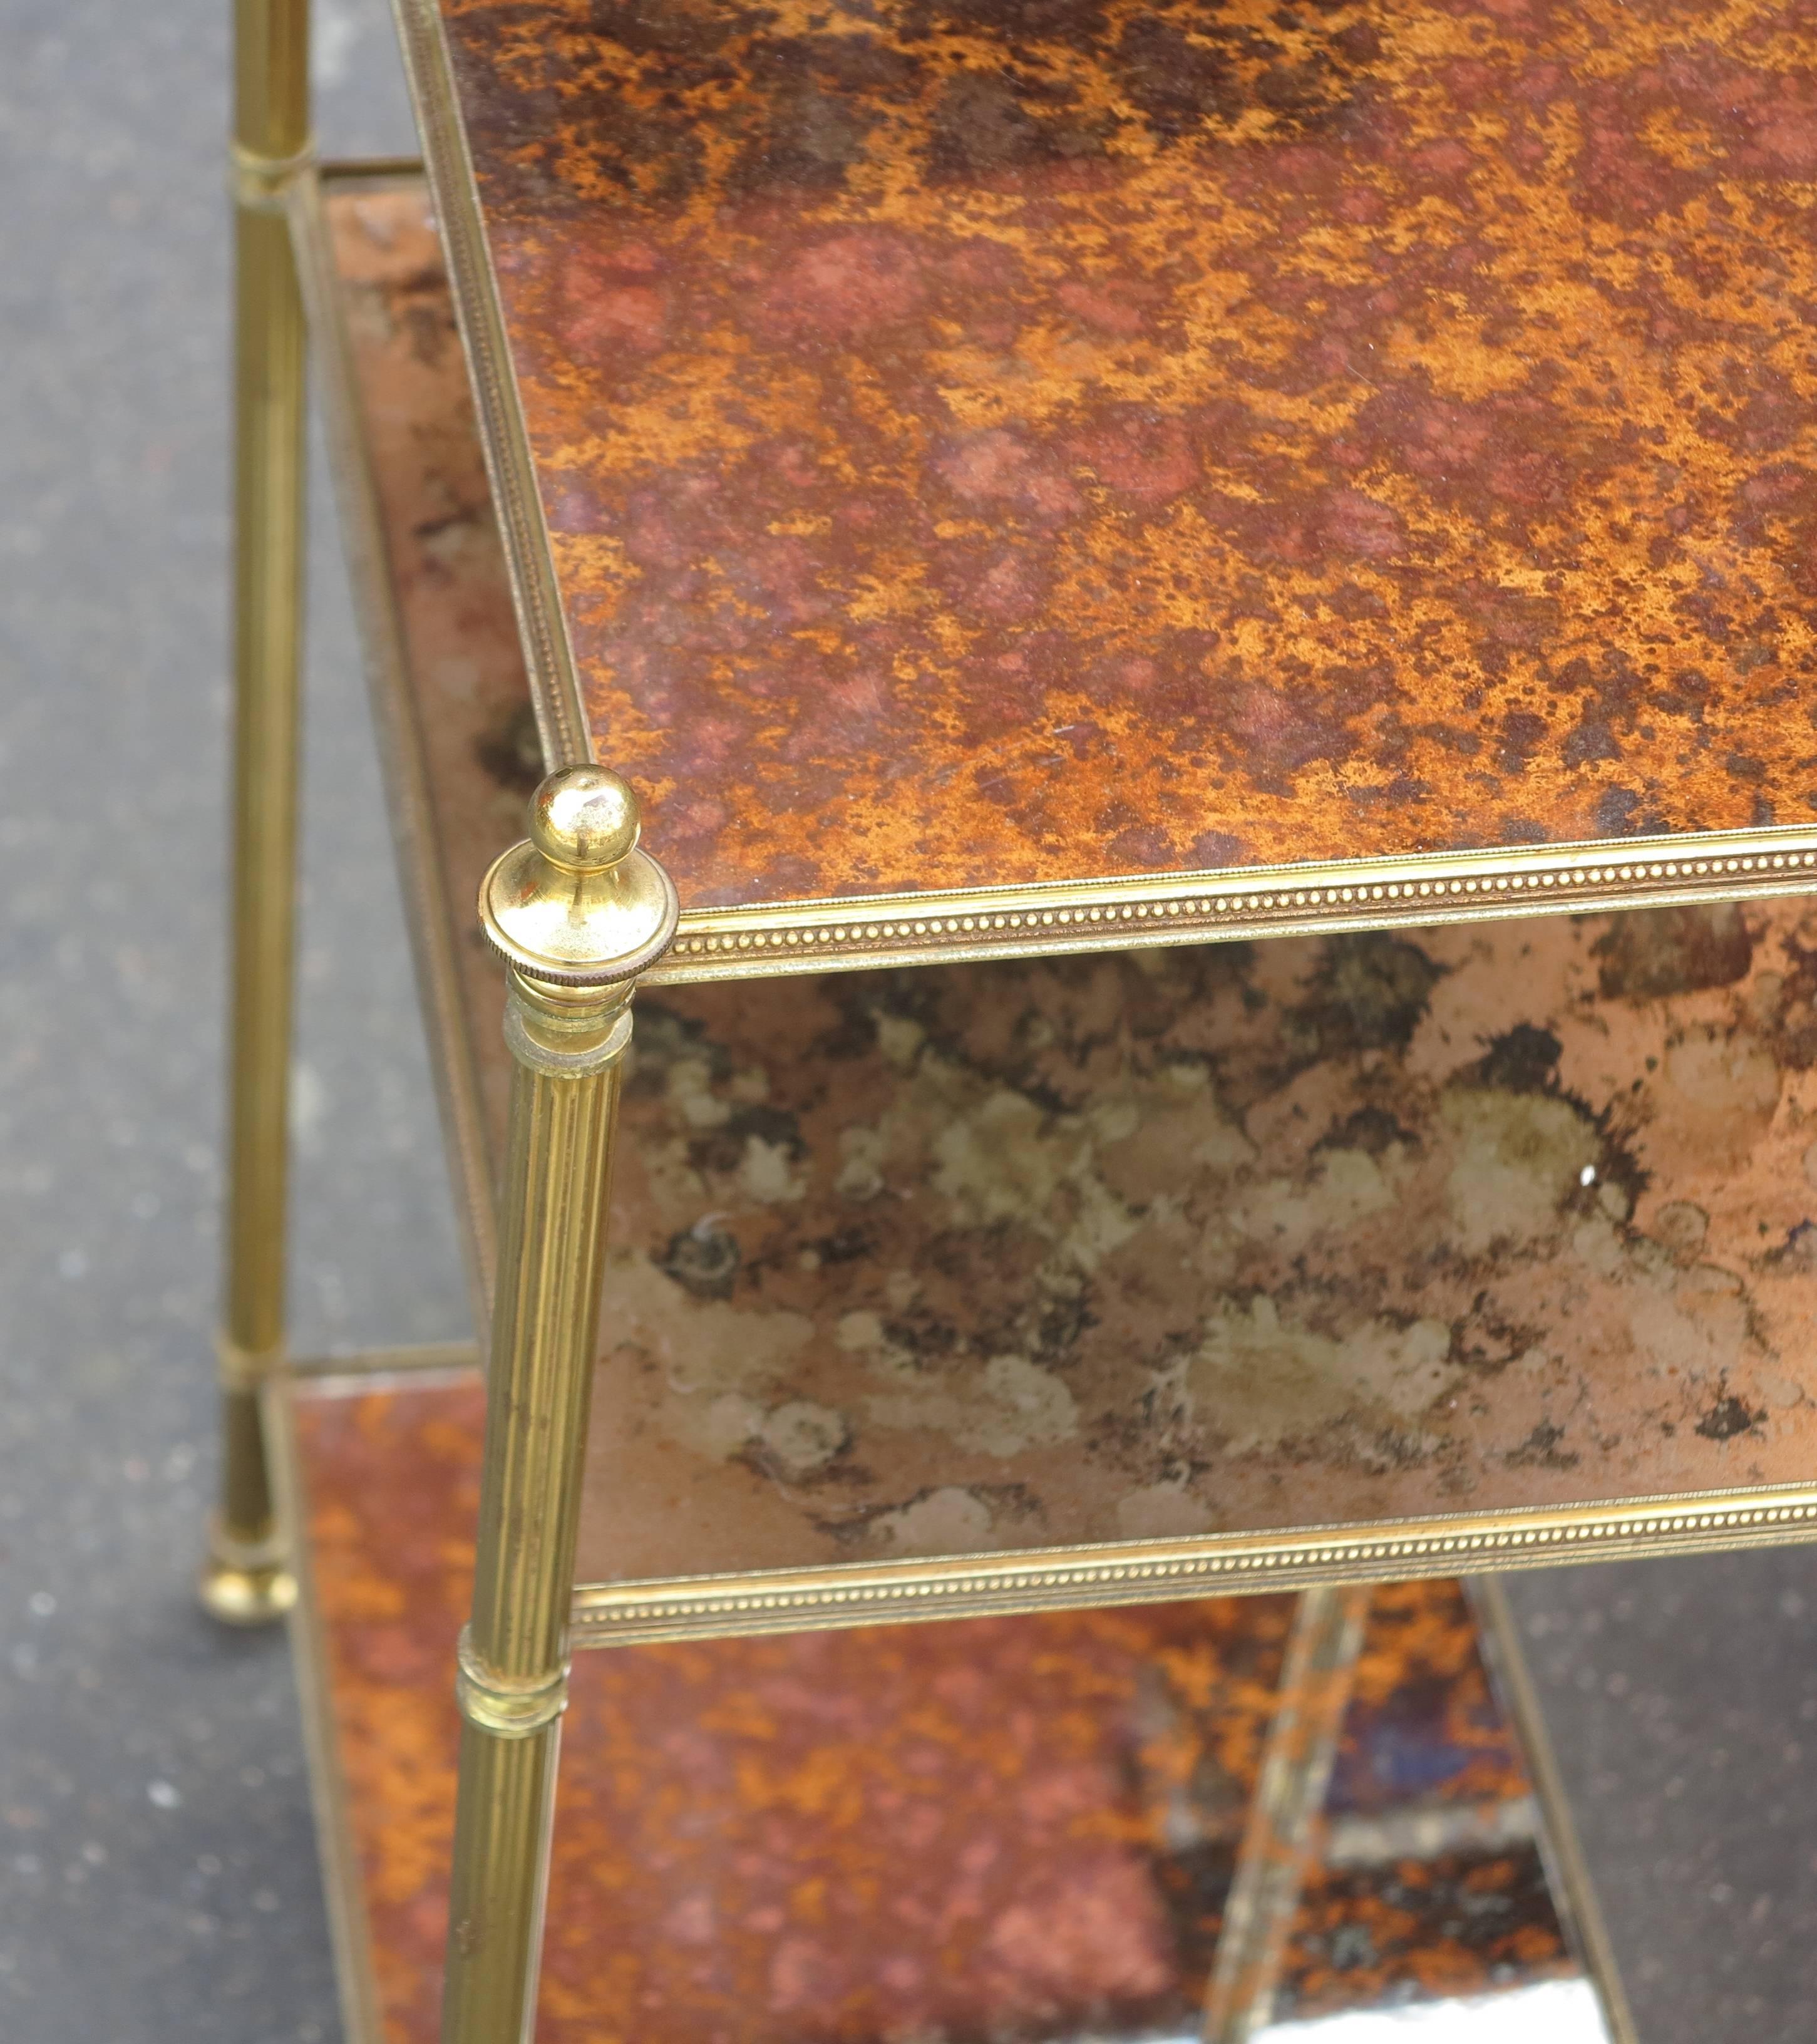  end of sofa gold-colored bronze with three levels in oxidized silver mirrors, rising screwed, circa 1950-1970, good condition.